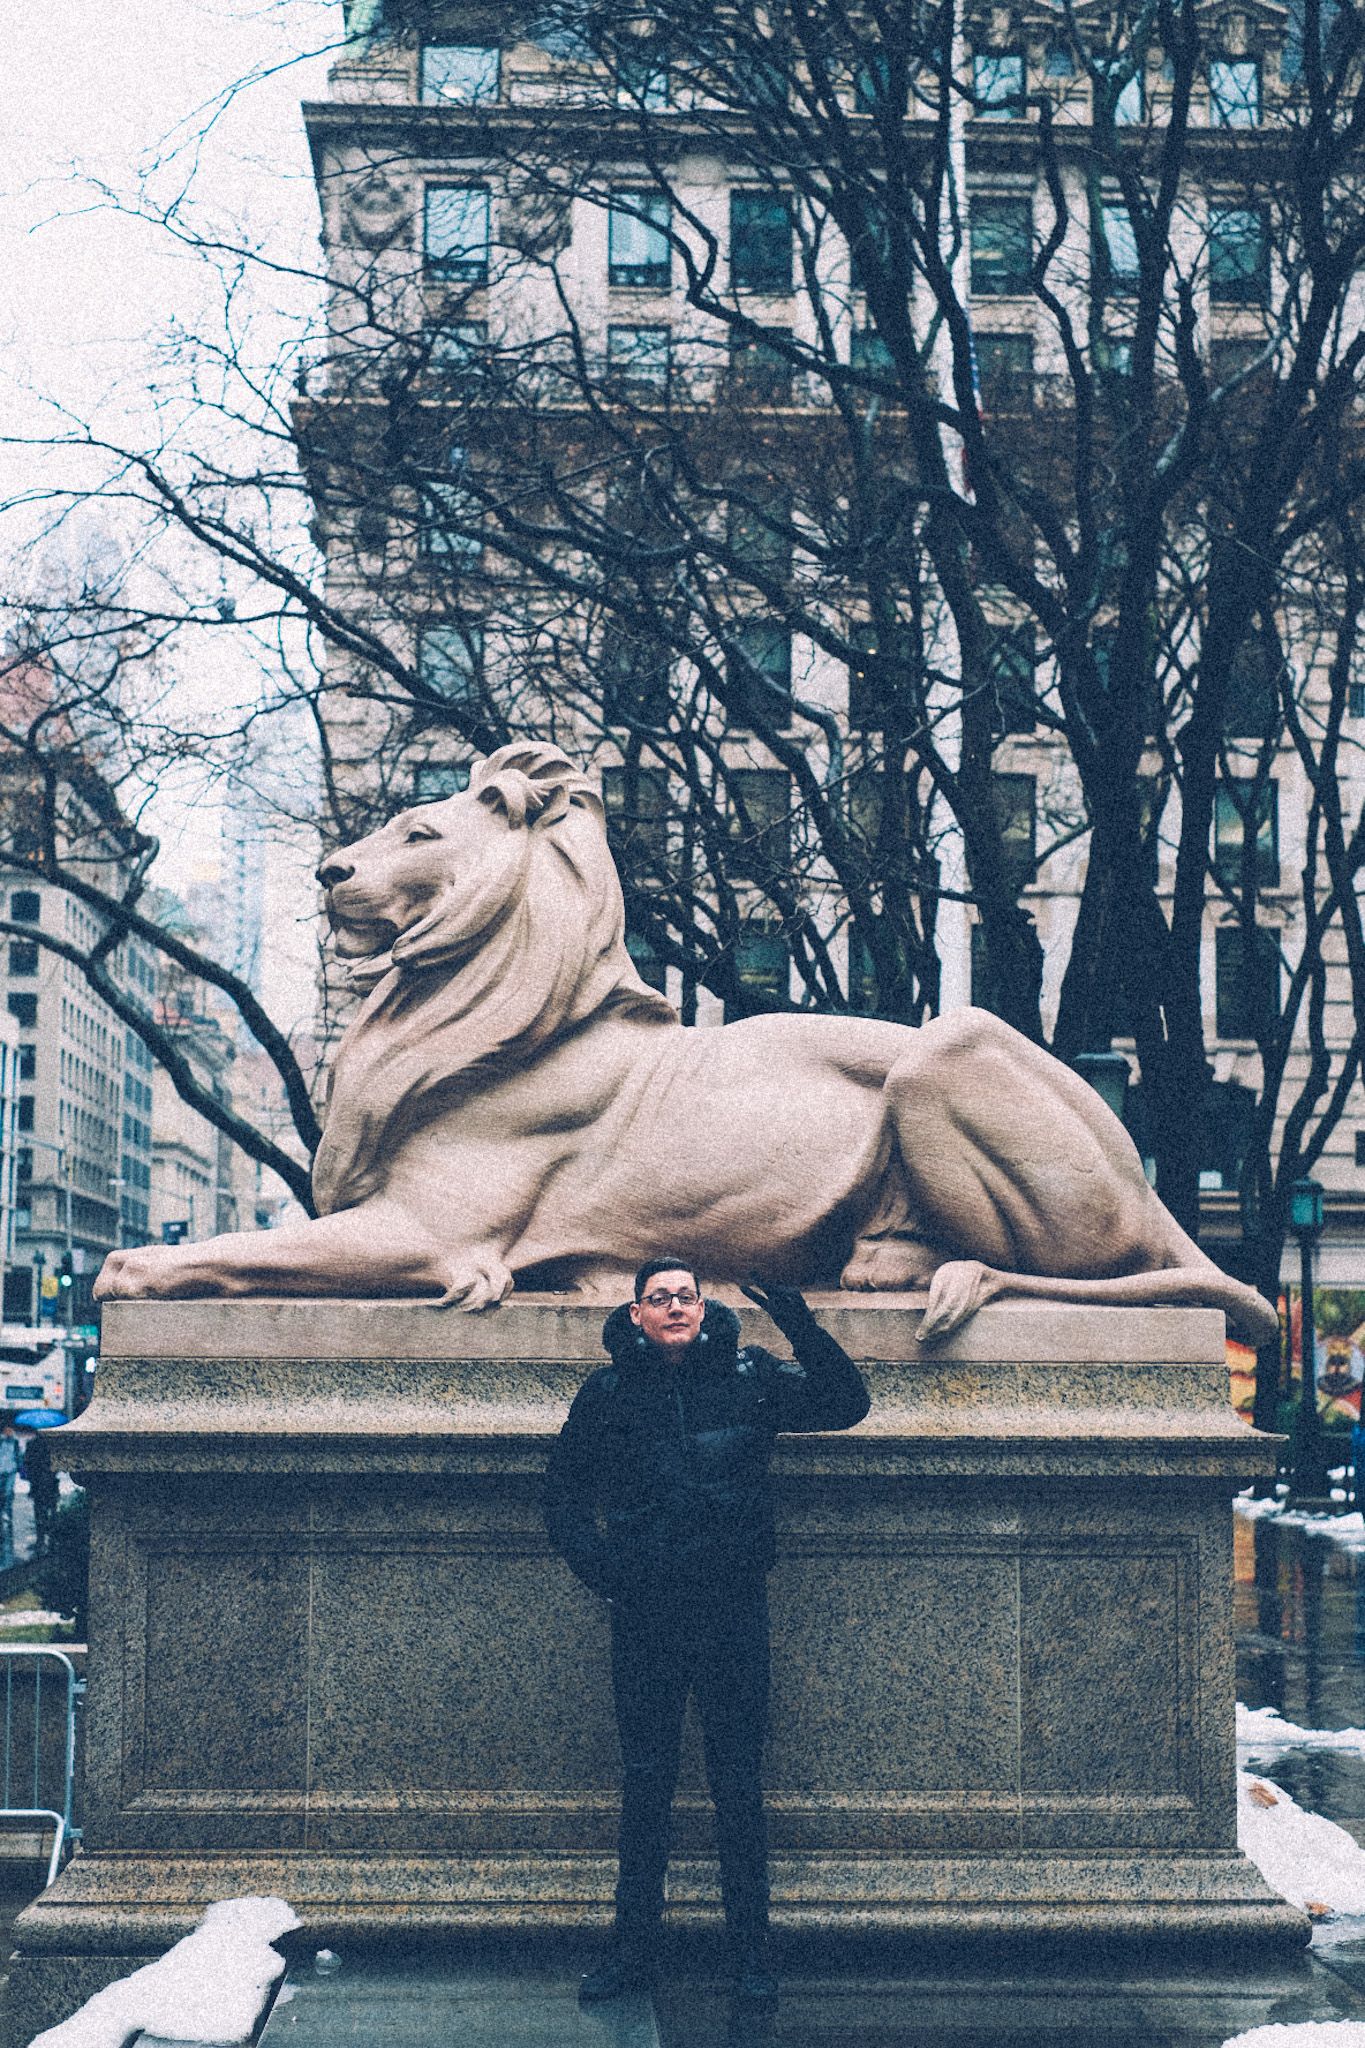 A man in all black stands in front of a gigantic lion statue, the ones outside of the New York Public Library�s main branch. Small mounds of snow and water puddles surround him.